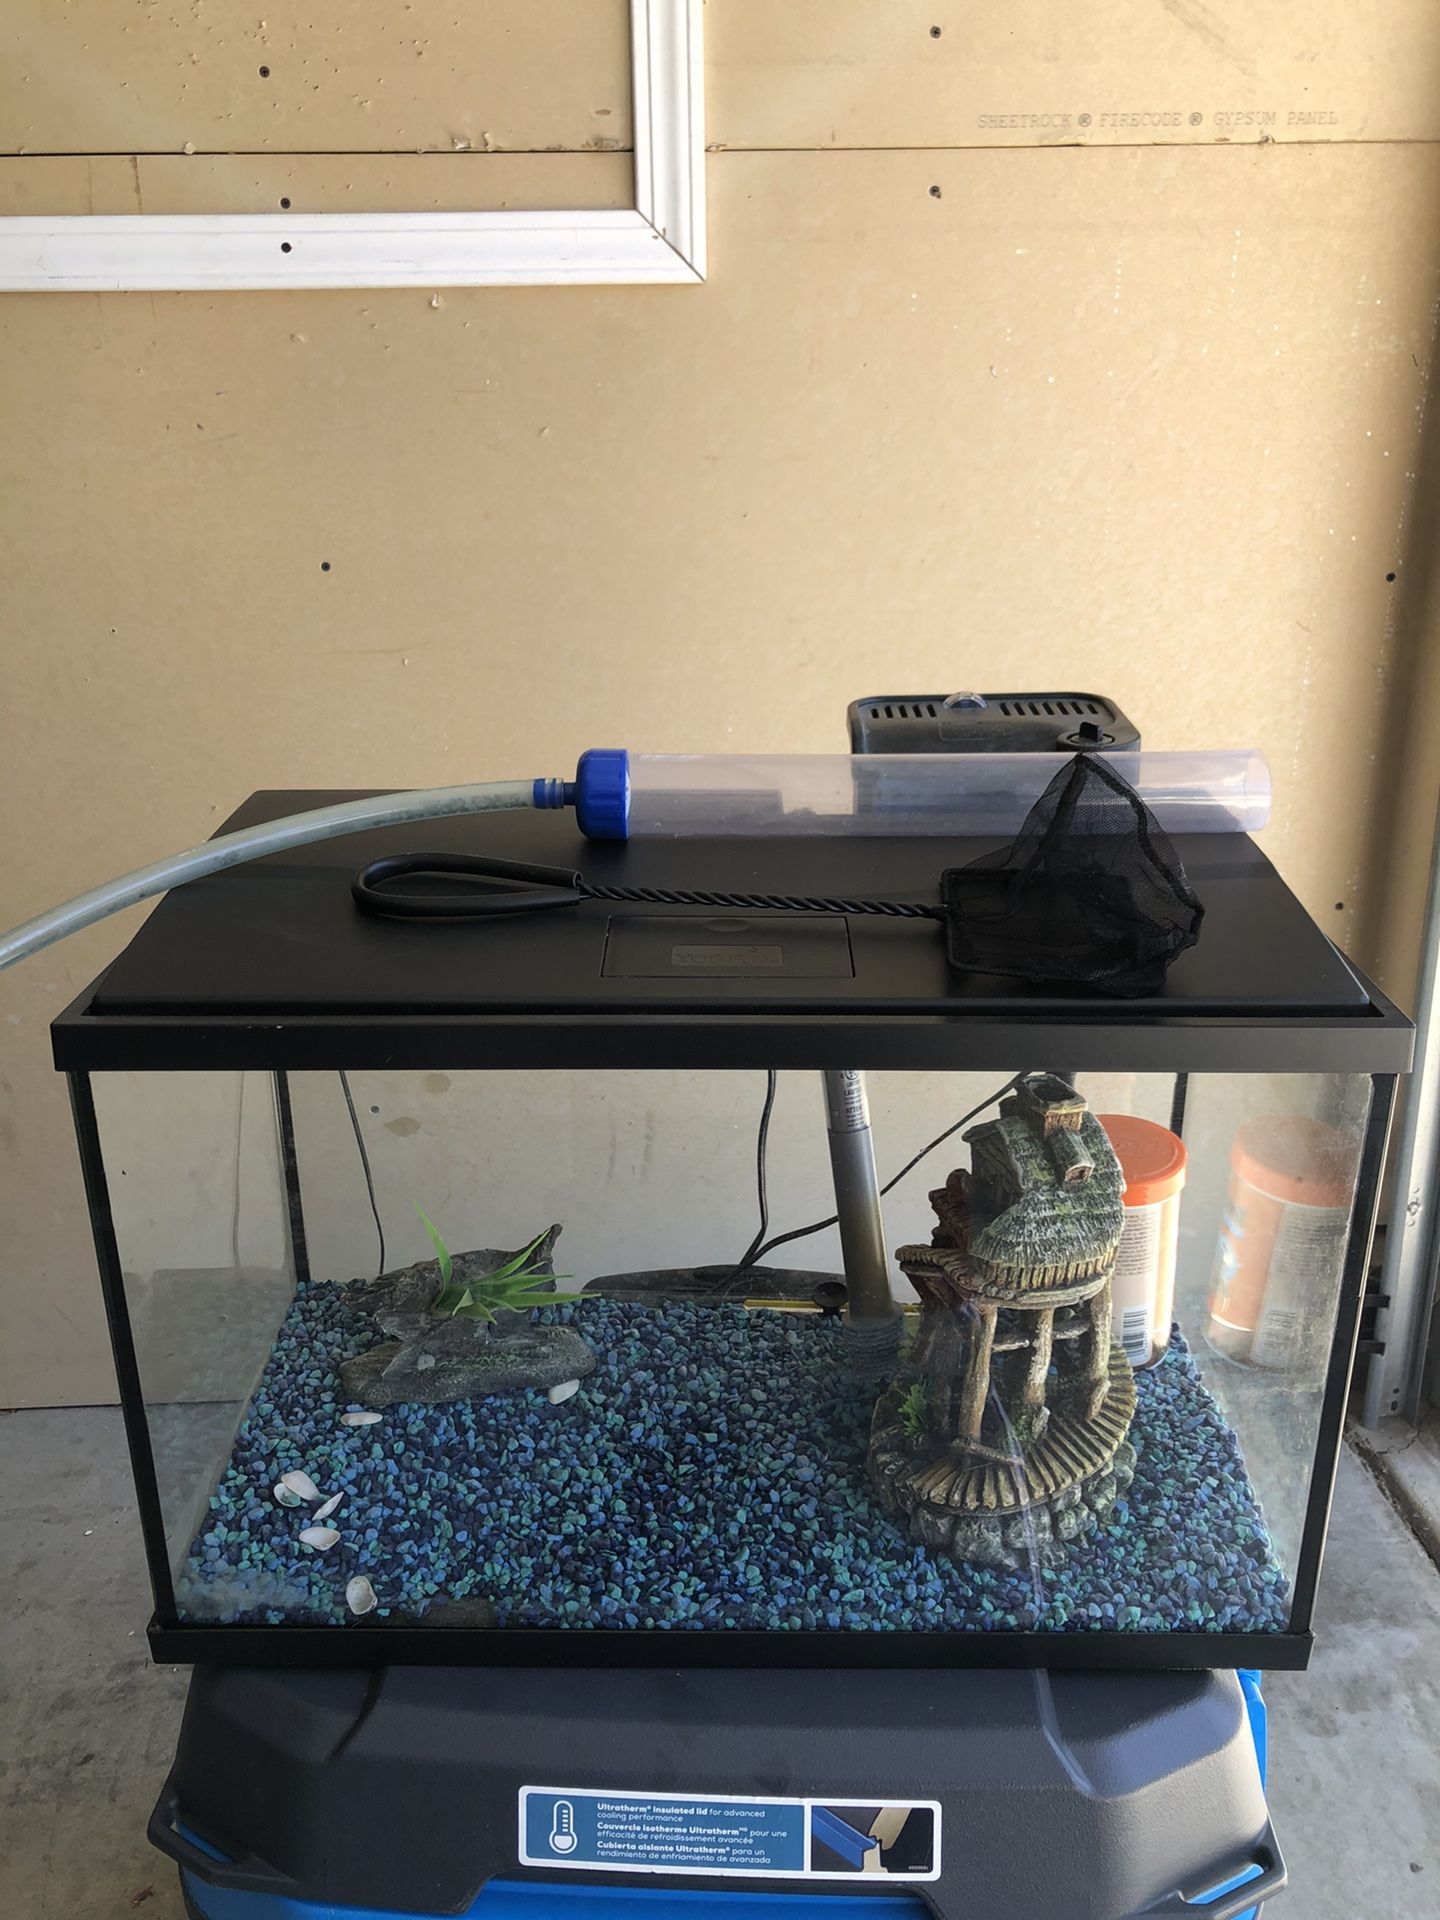 Fish Tank Aquarium Fully Furnished, Food, Net, Heater, and Filter 10 Gallon